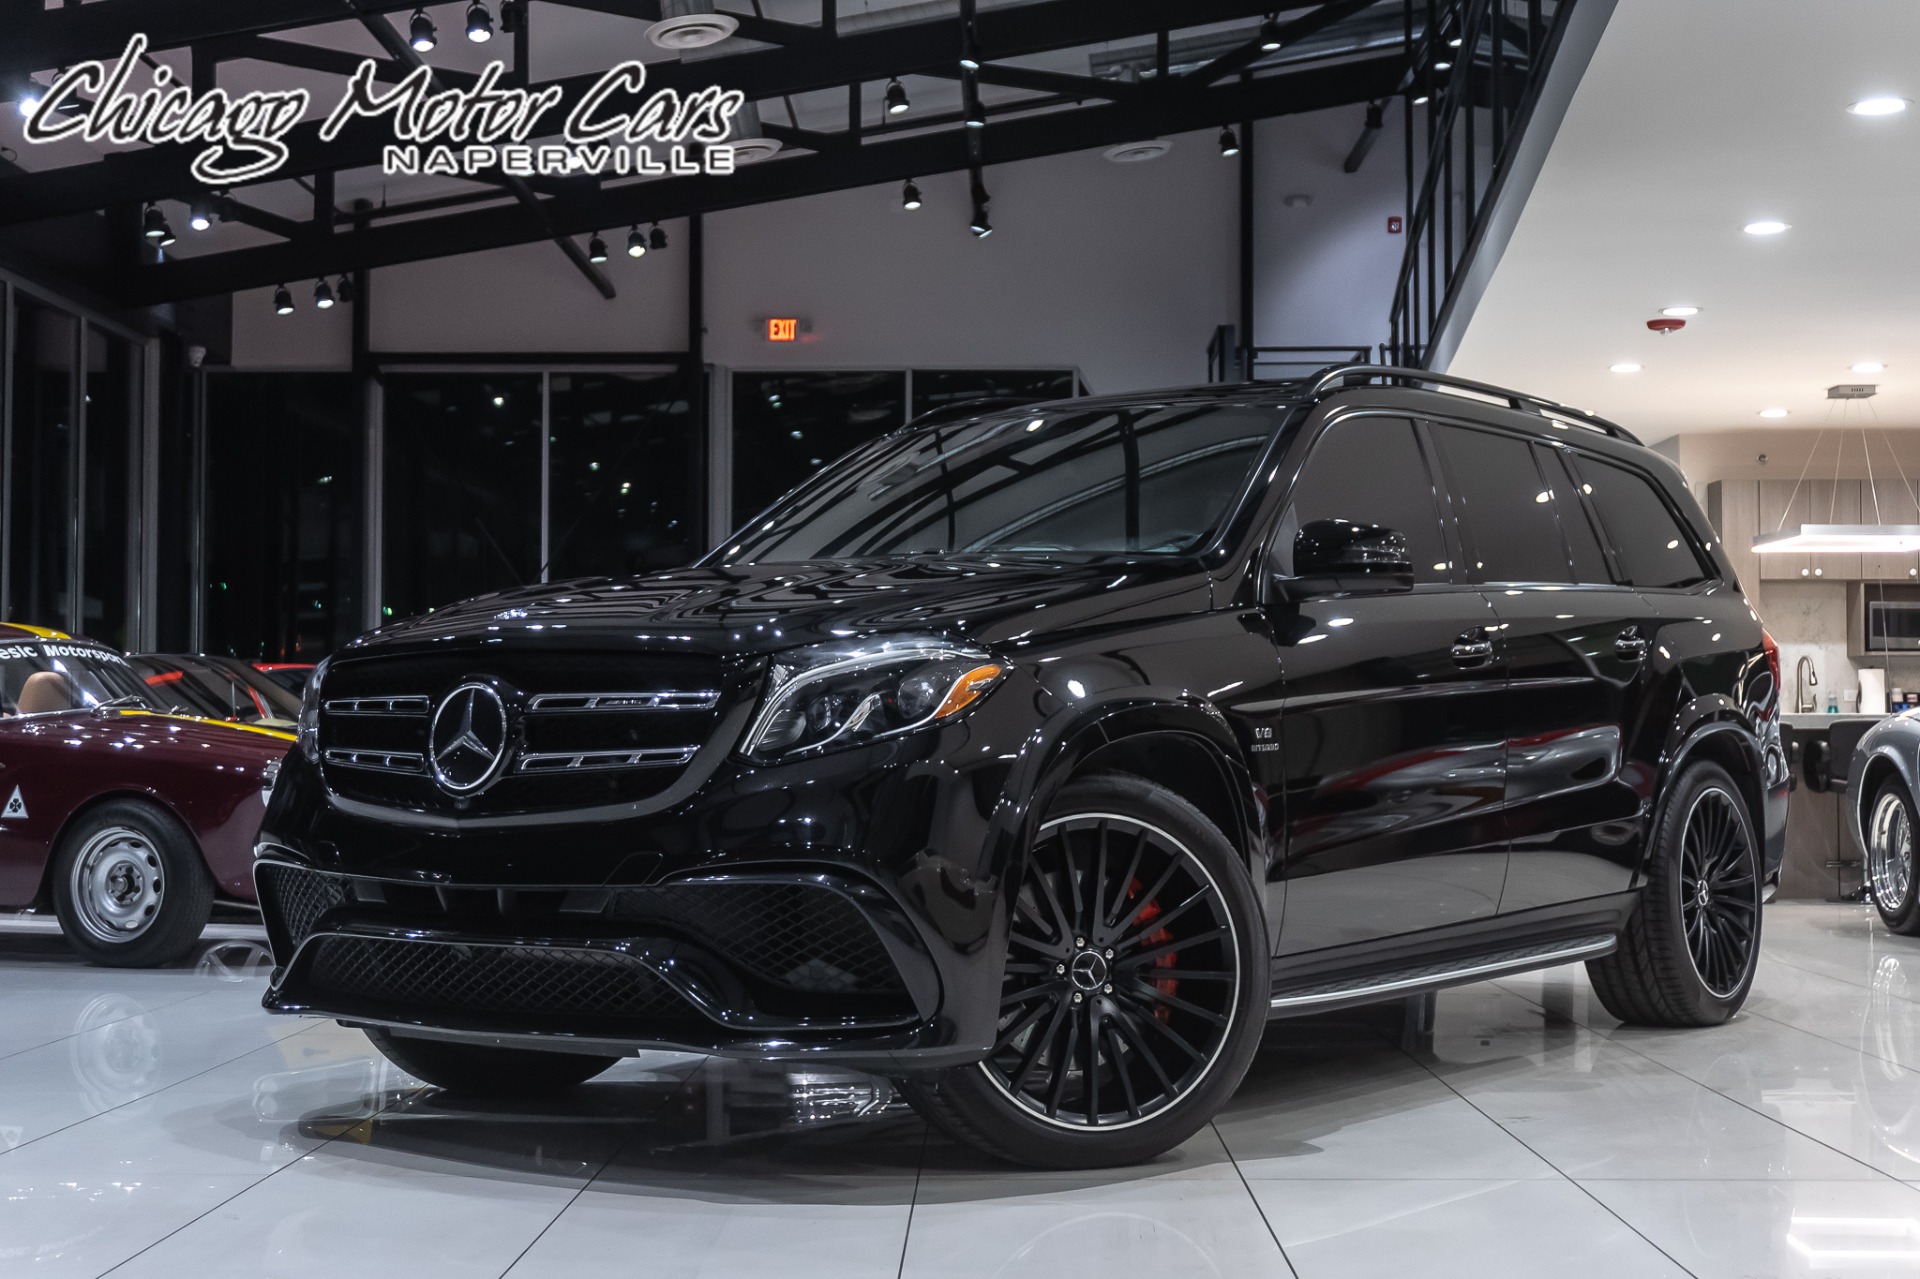 Used 2018 Mercedes-Benz GLS63 AMG SUV NIGHT STYLING PKG! 22 INCH WHEELS!  $129,990 MSRP! For Sale (Special Pricing) | Chicago Motor Cars Stock #17953